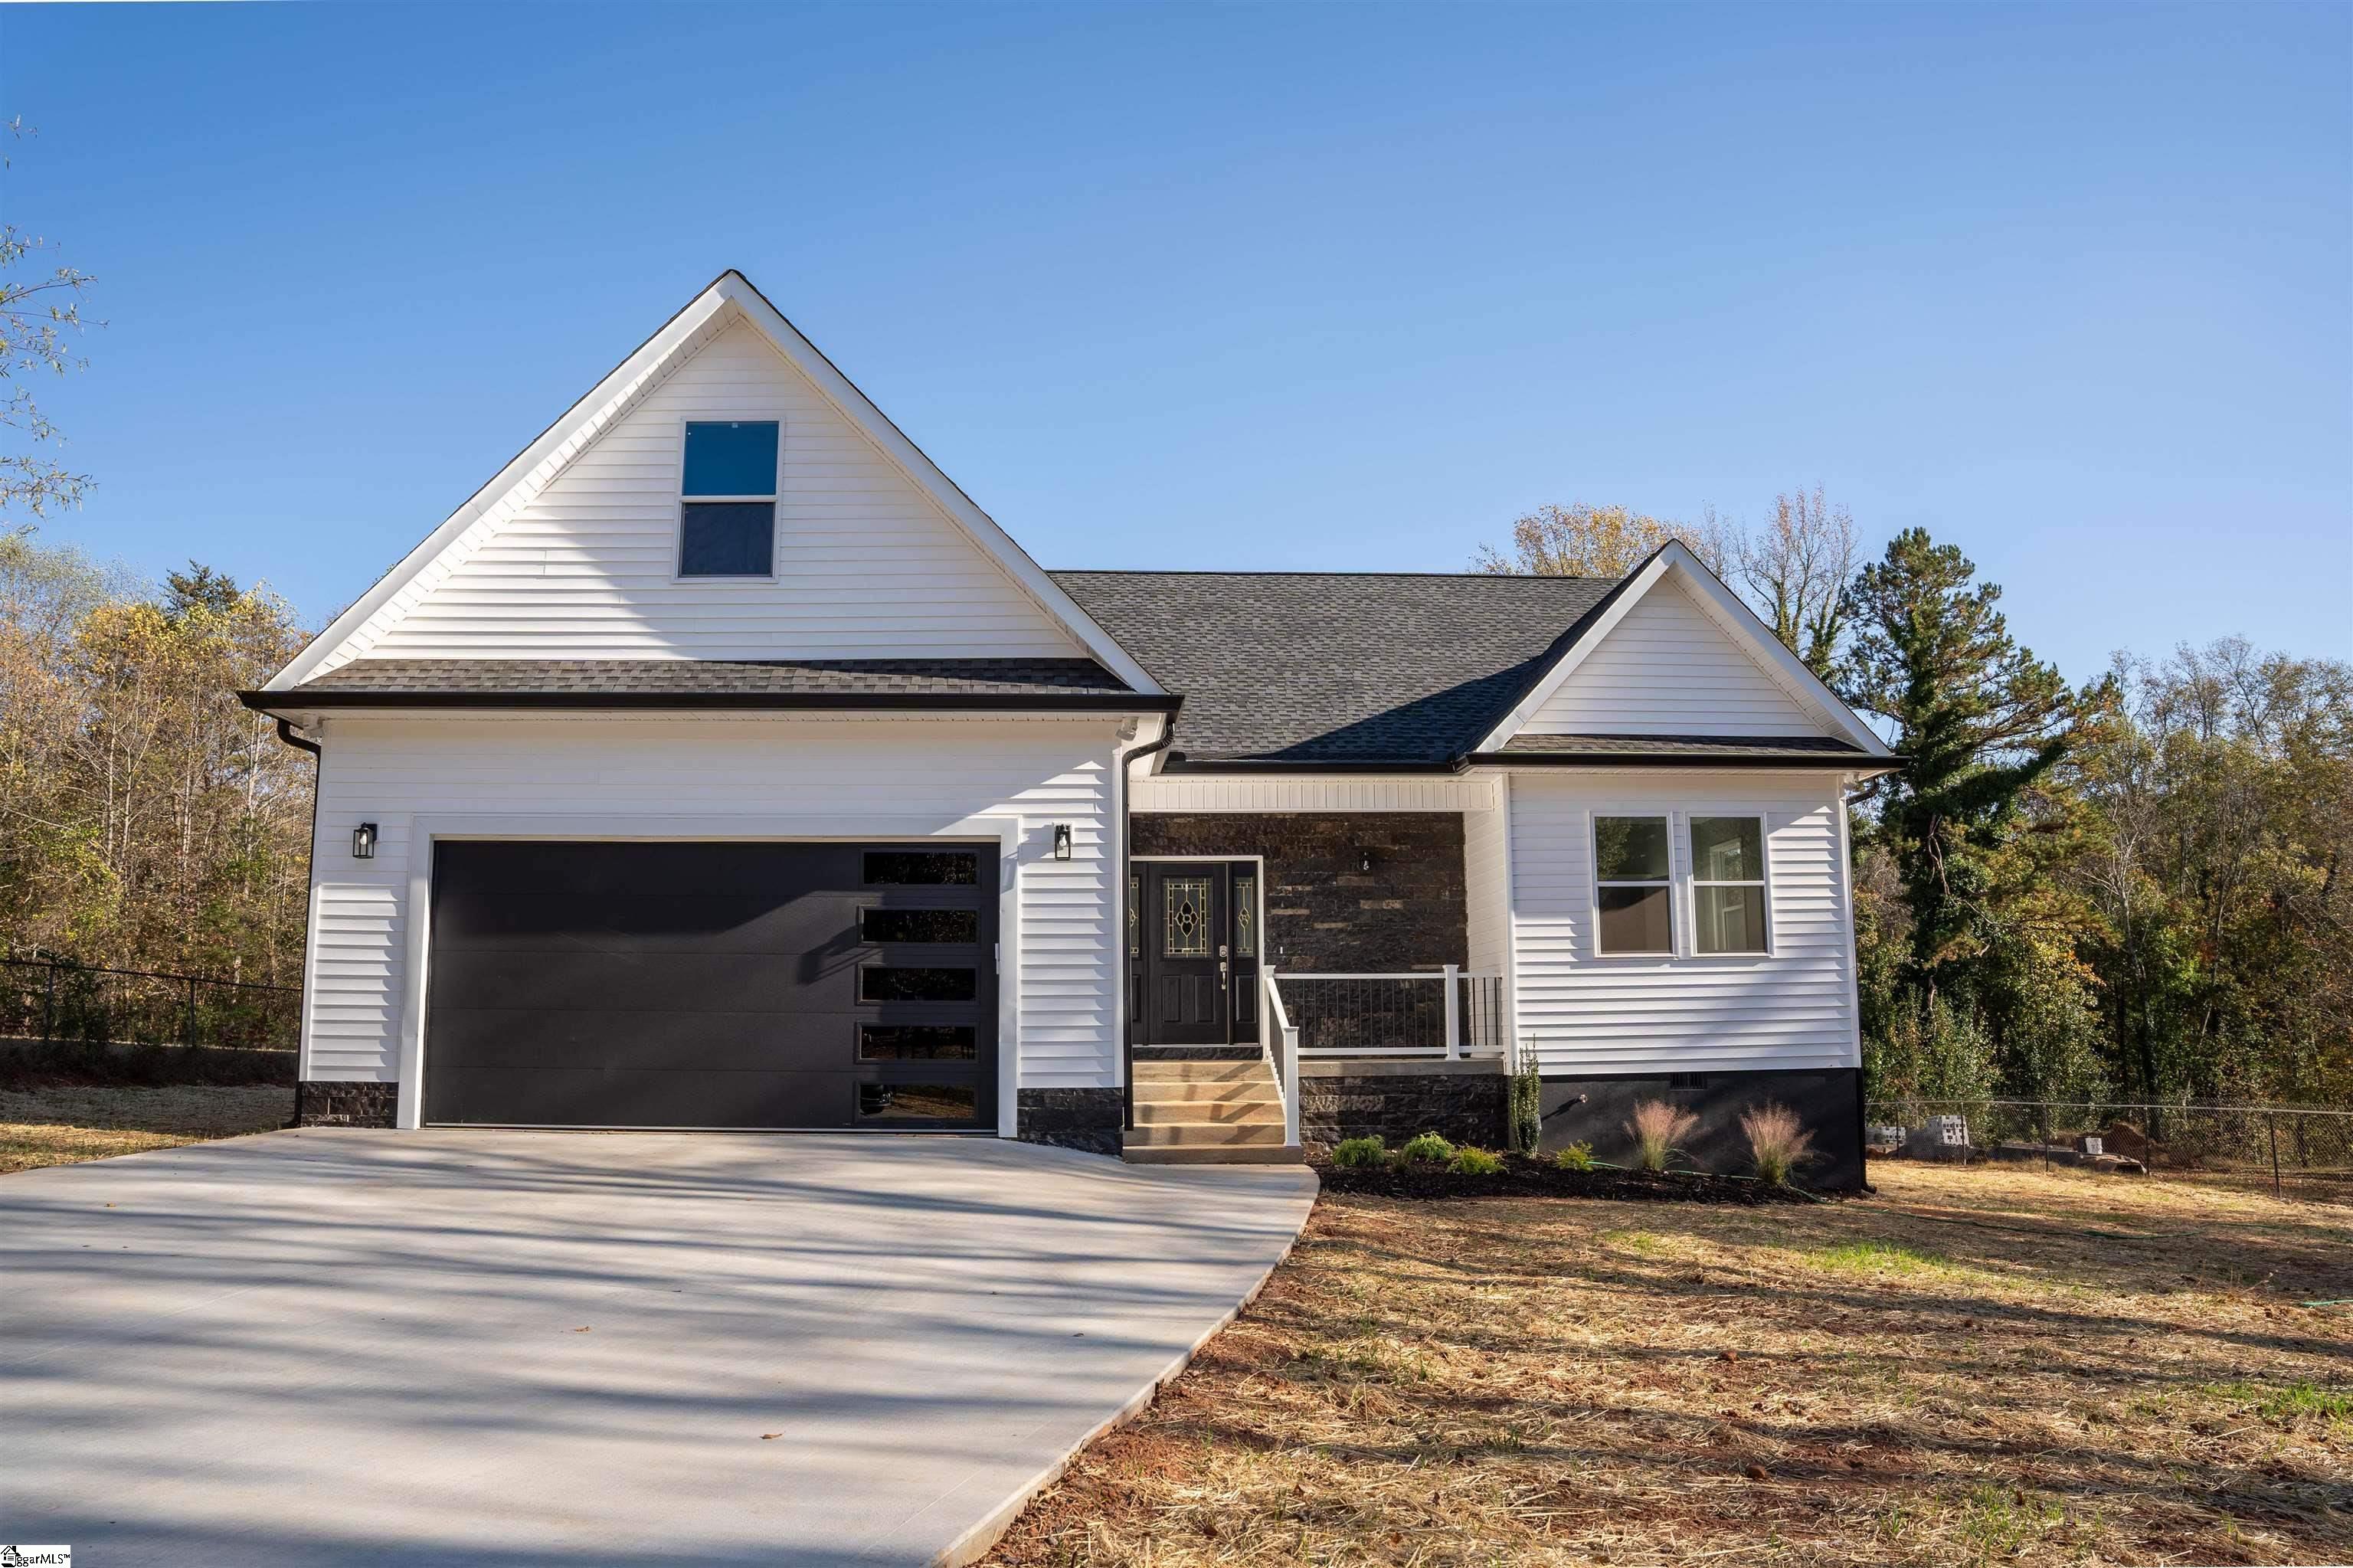 171 Riverbluff Extension Inman, SC 29349